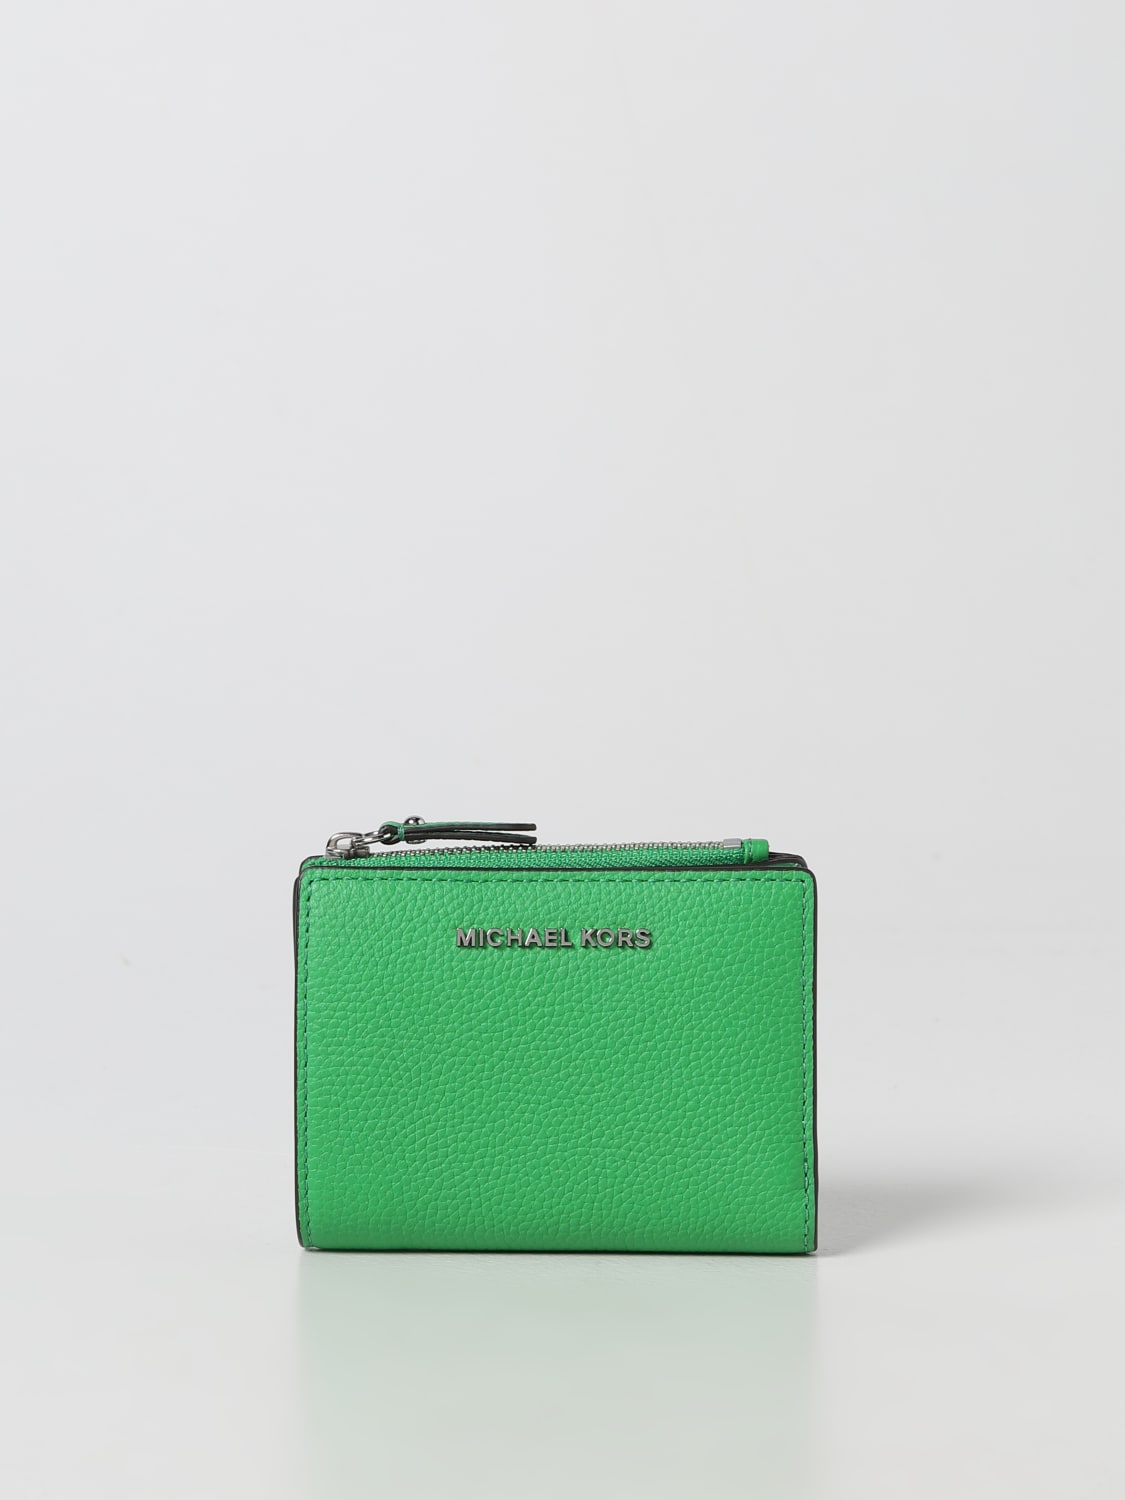 MICHAEL KORS: Michael wallet in grained leather - Green | Michael Kors  wallet 34S1SJ6F6L online at GIGLIO.COM